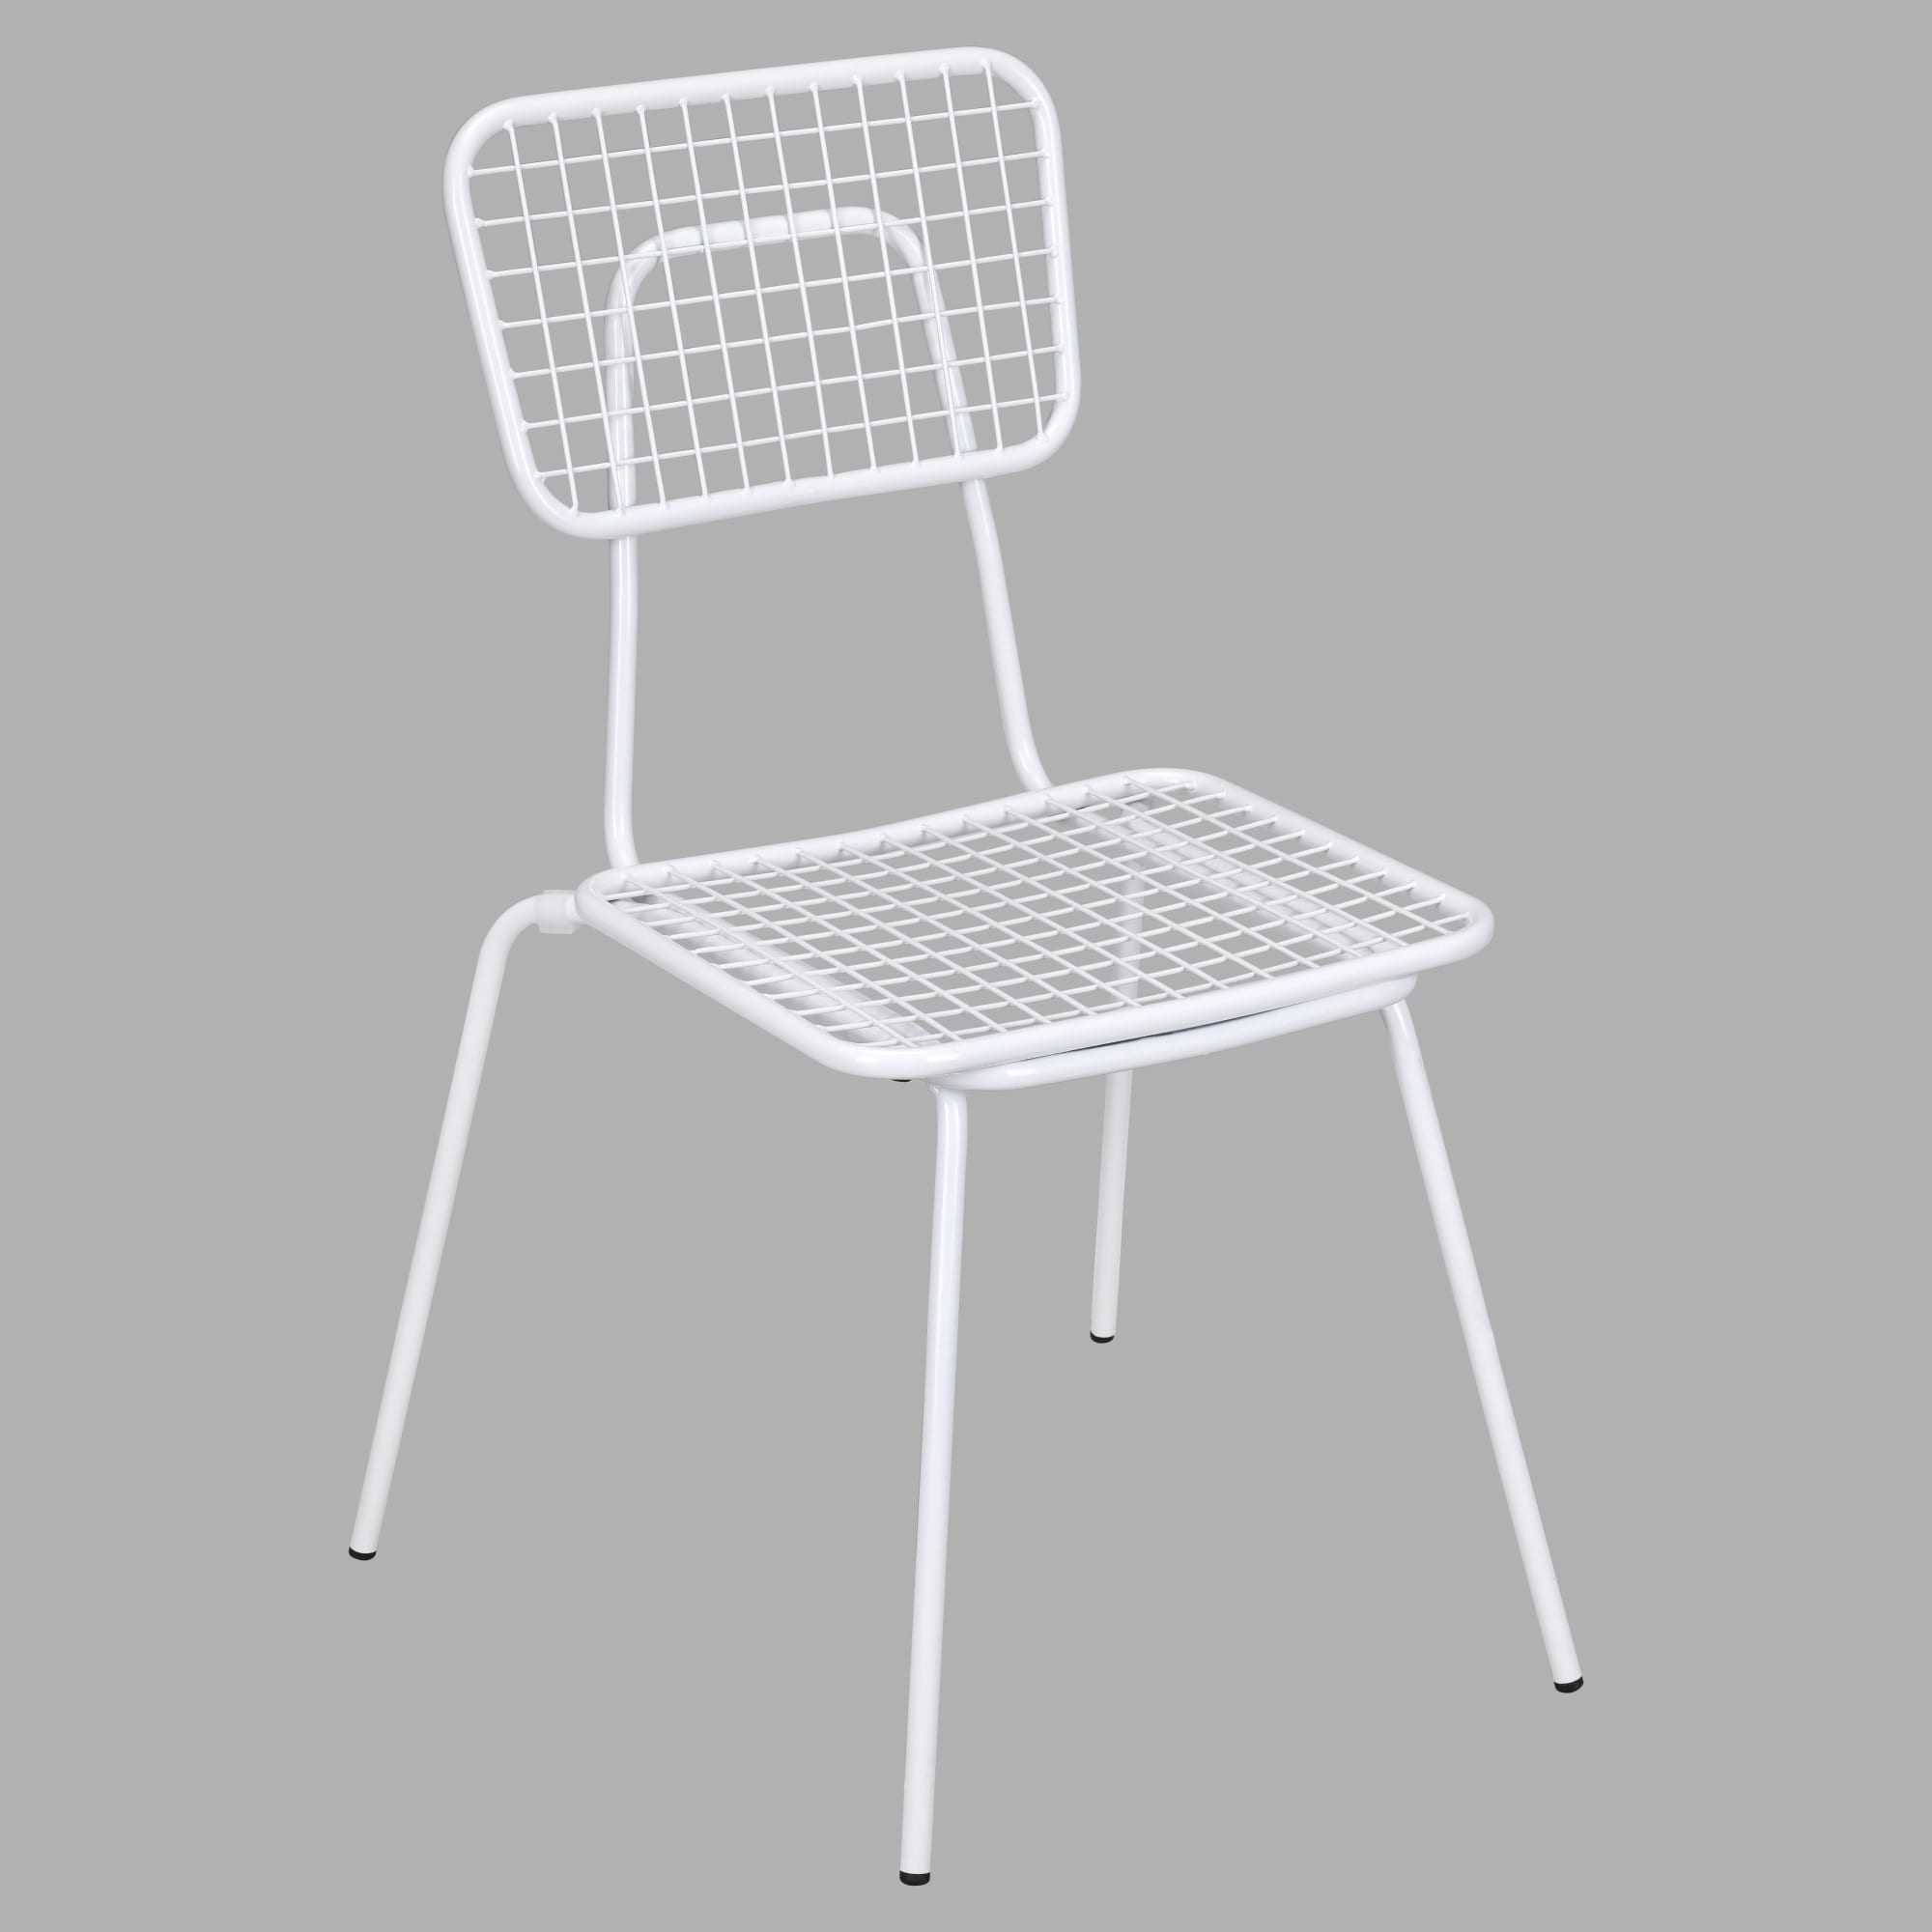 Ollie Patio Chair in White Finish with Ollie Patio Chair in White Finish